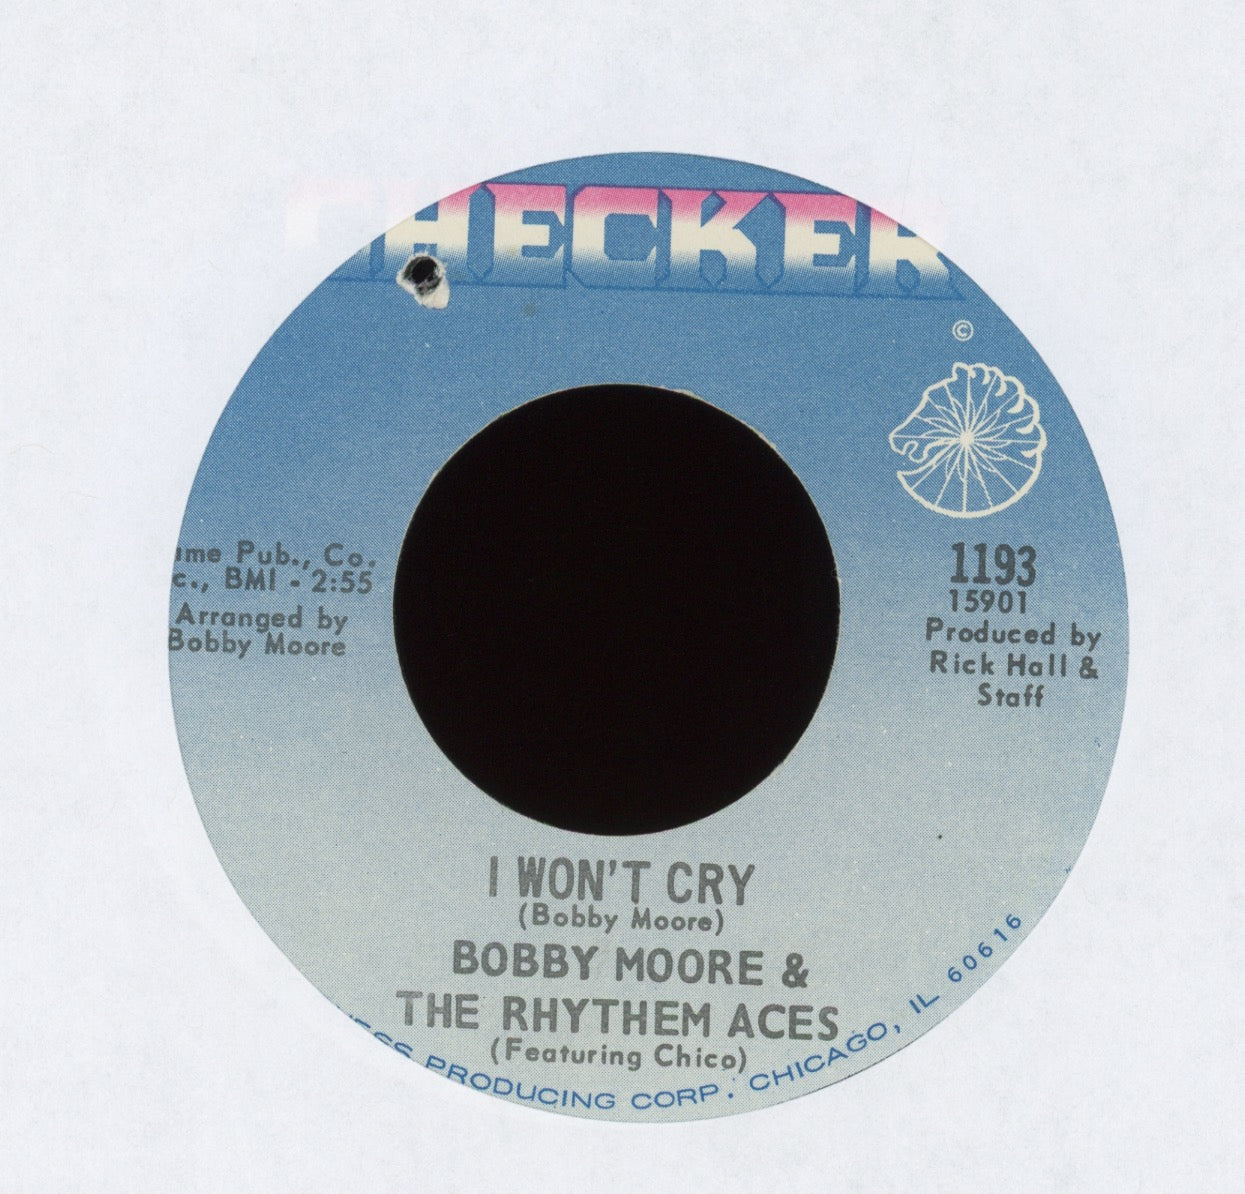 Bobby Moore & The Rhythm Aces - I Wanna Be Your Man on Checker Soul 45